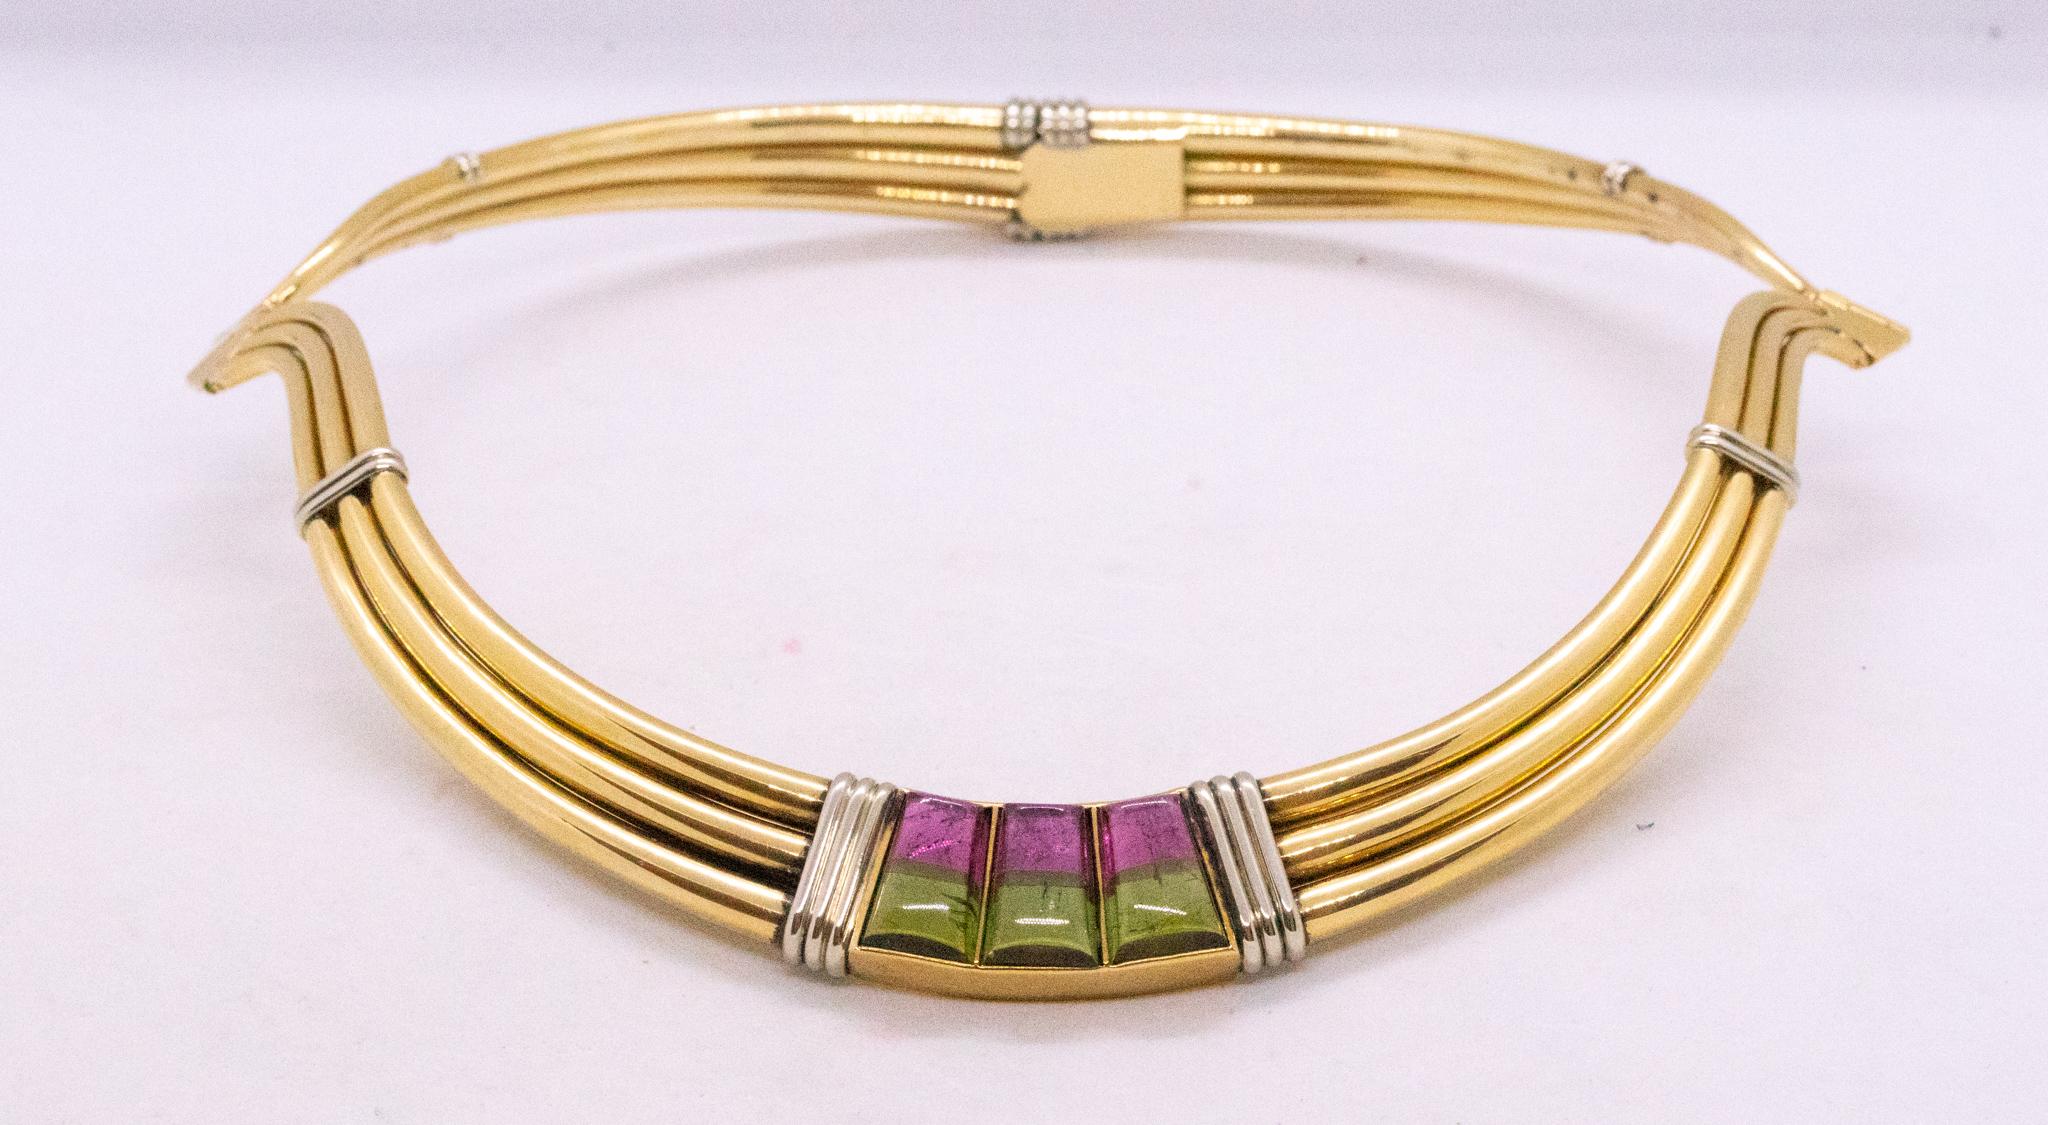 Cabochon Gucci 1970 Milan Very Rare Choker Necklace 18Kt Gold 16.02 Cts in Tourmaline